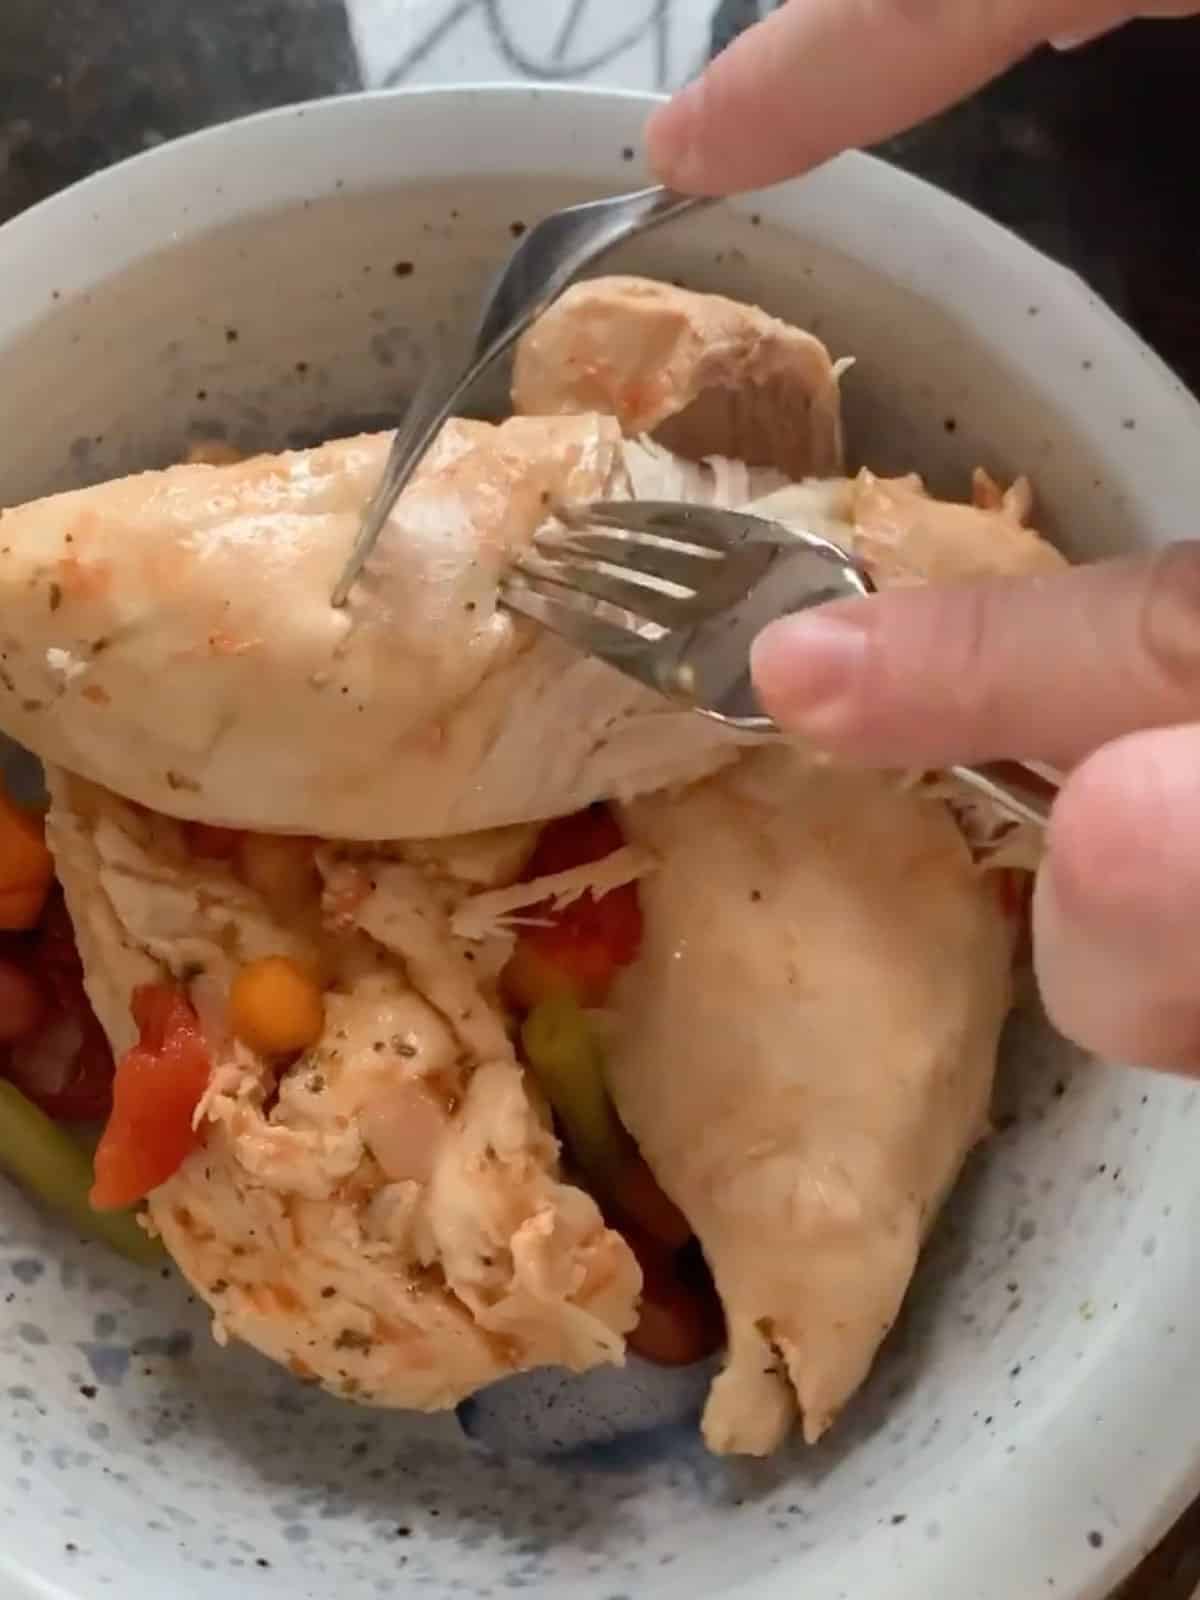 Hands shredding chicken with forks in a gray bowl.